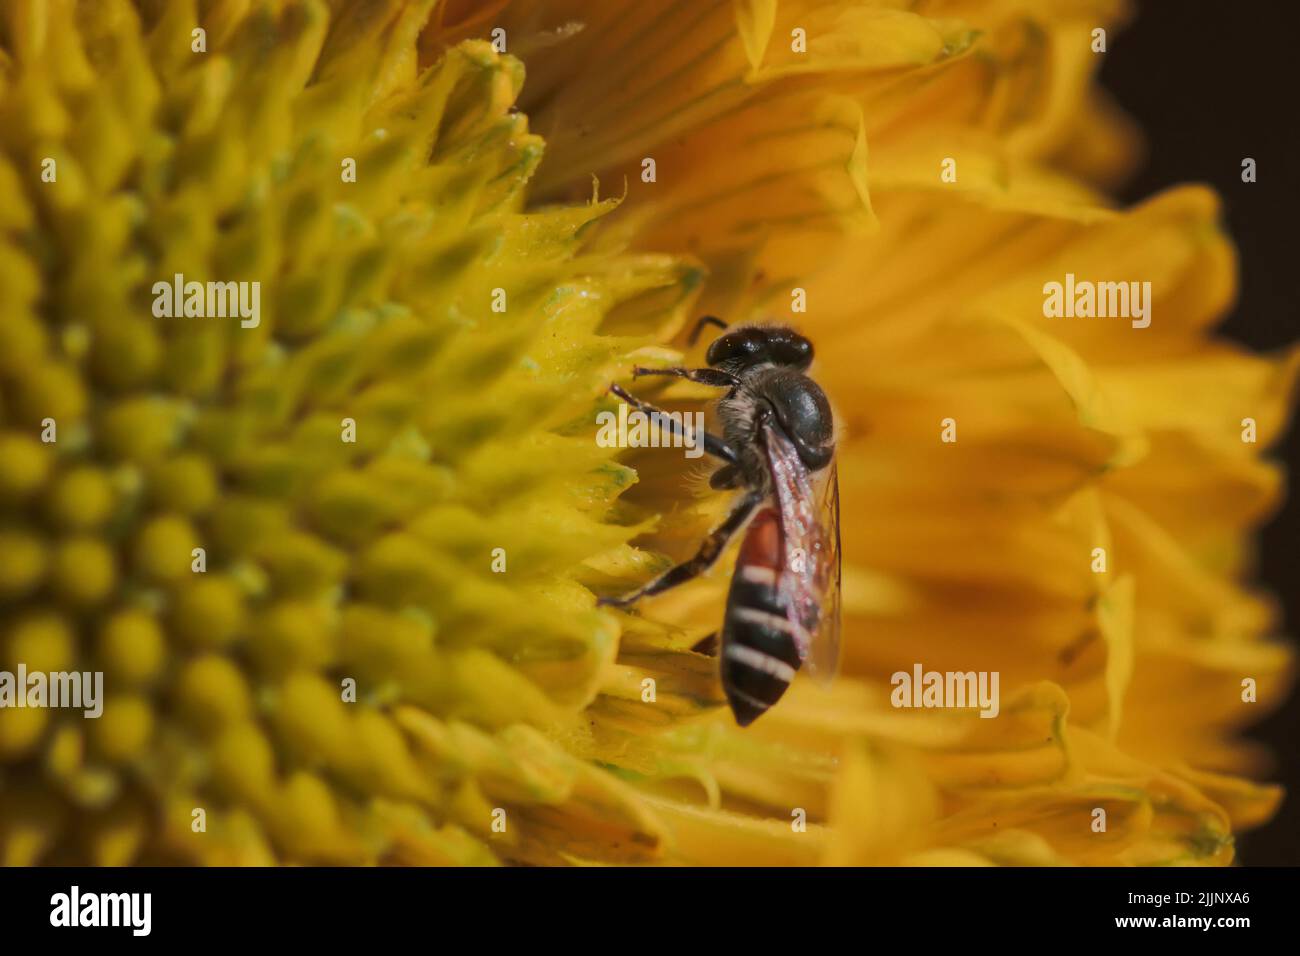 Honey bee getting nectar from flower. Used selective focus. Stock Photo